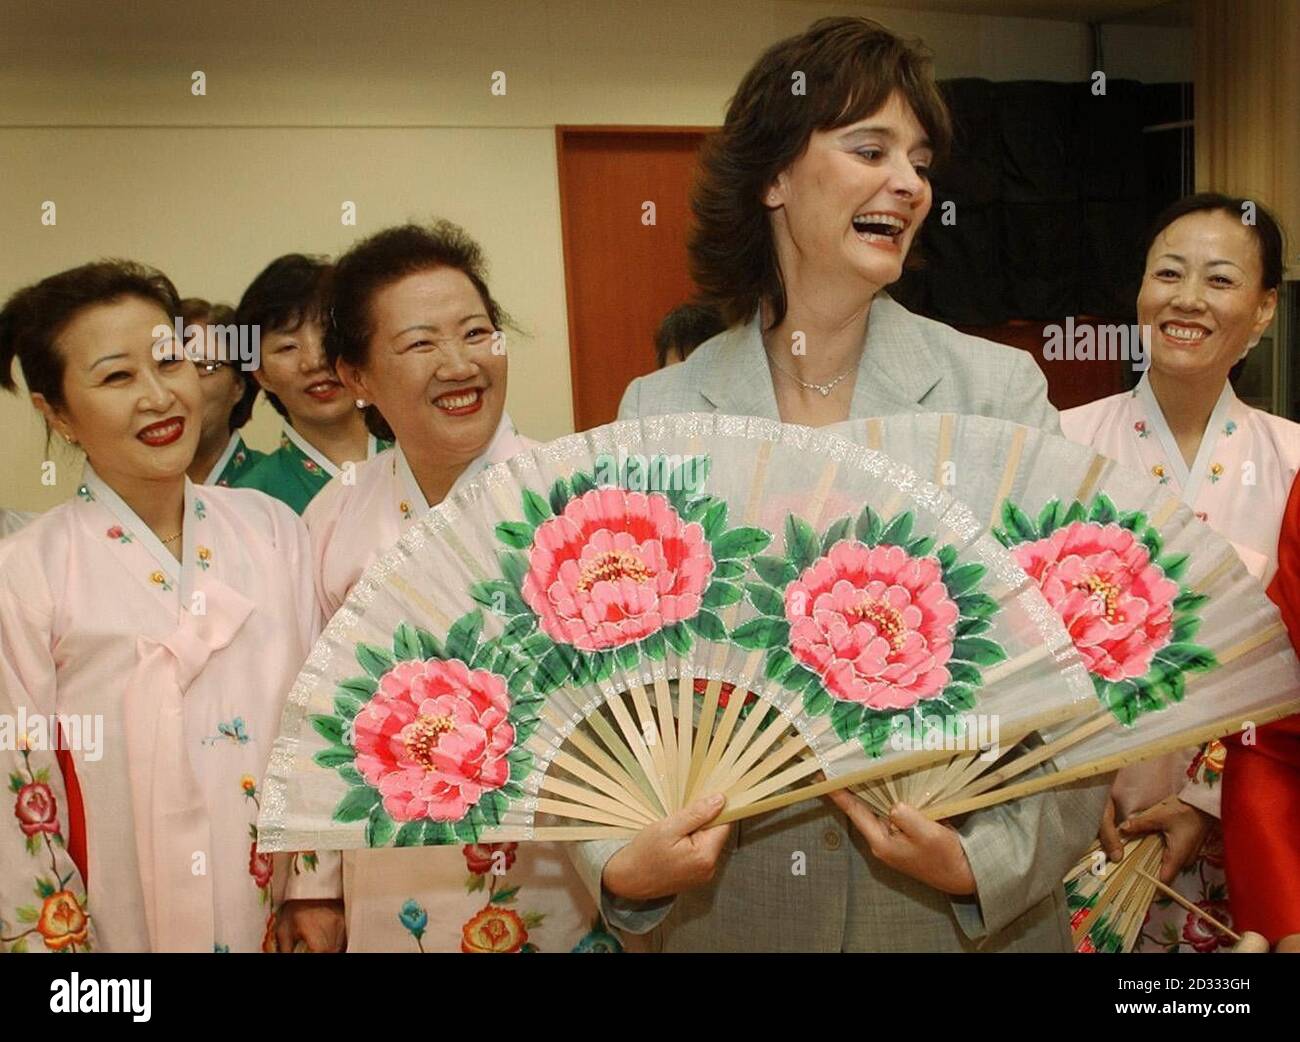 Prime Minister's wife Cherie Blair meets shoppers who also take dancing lessons at a branch of Tesco supermarkets in Seoul in South Korea. Stock Photo